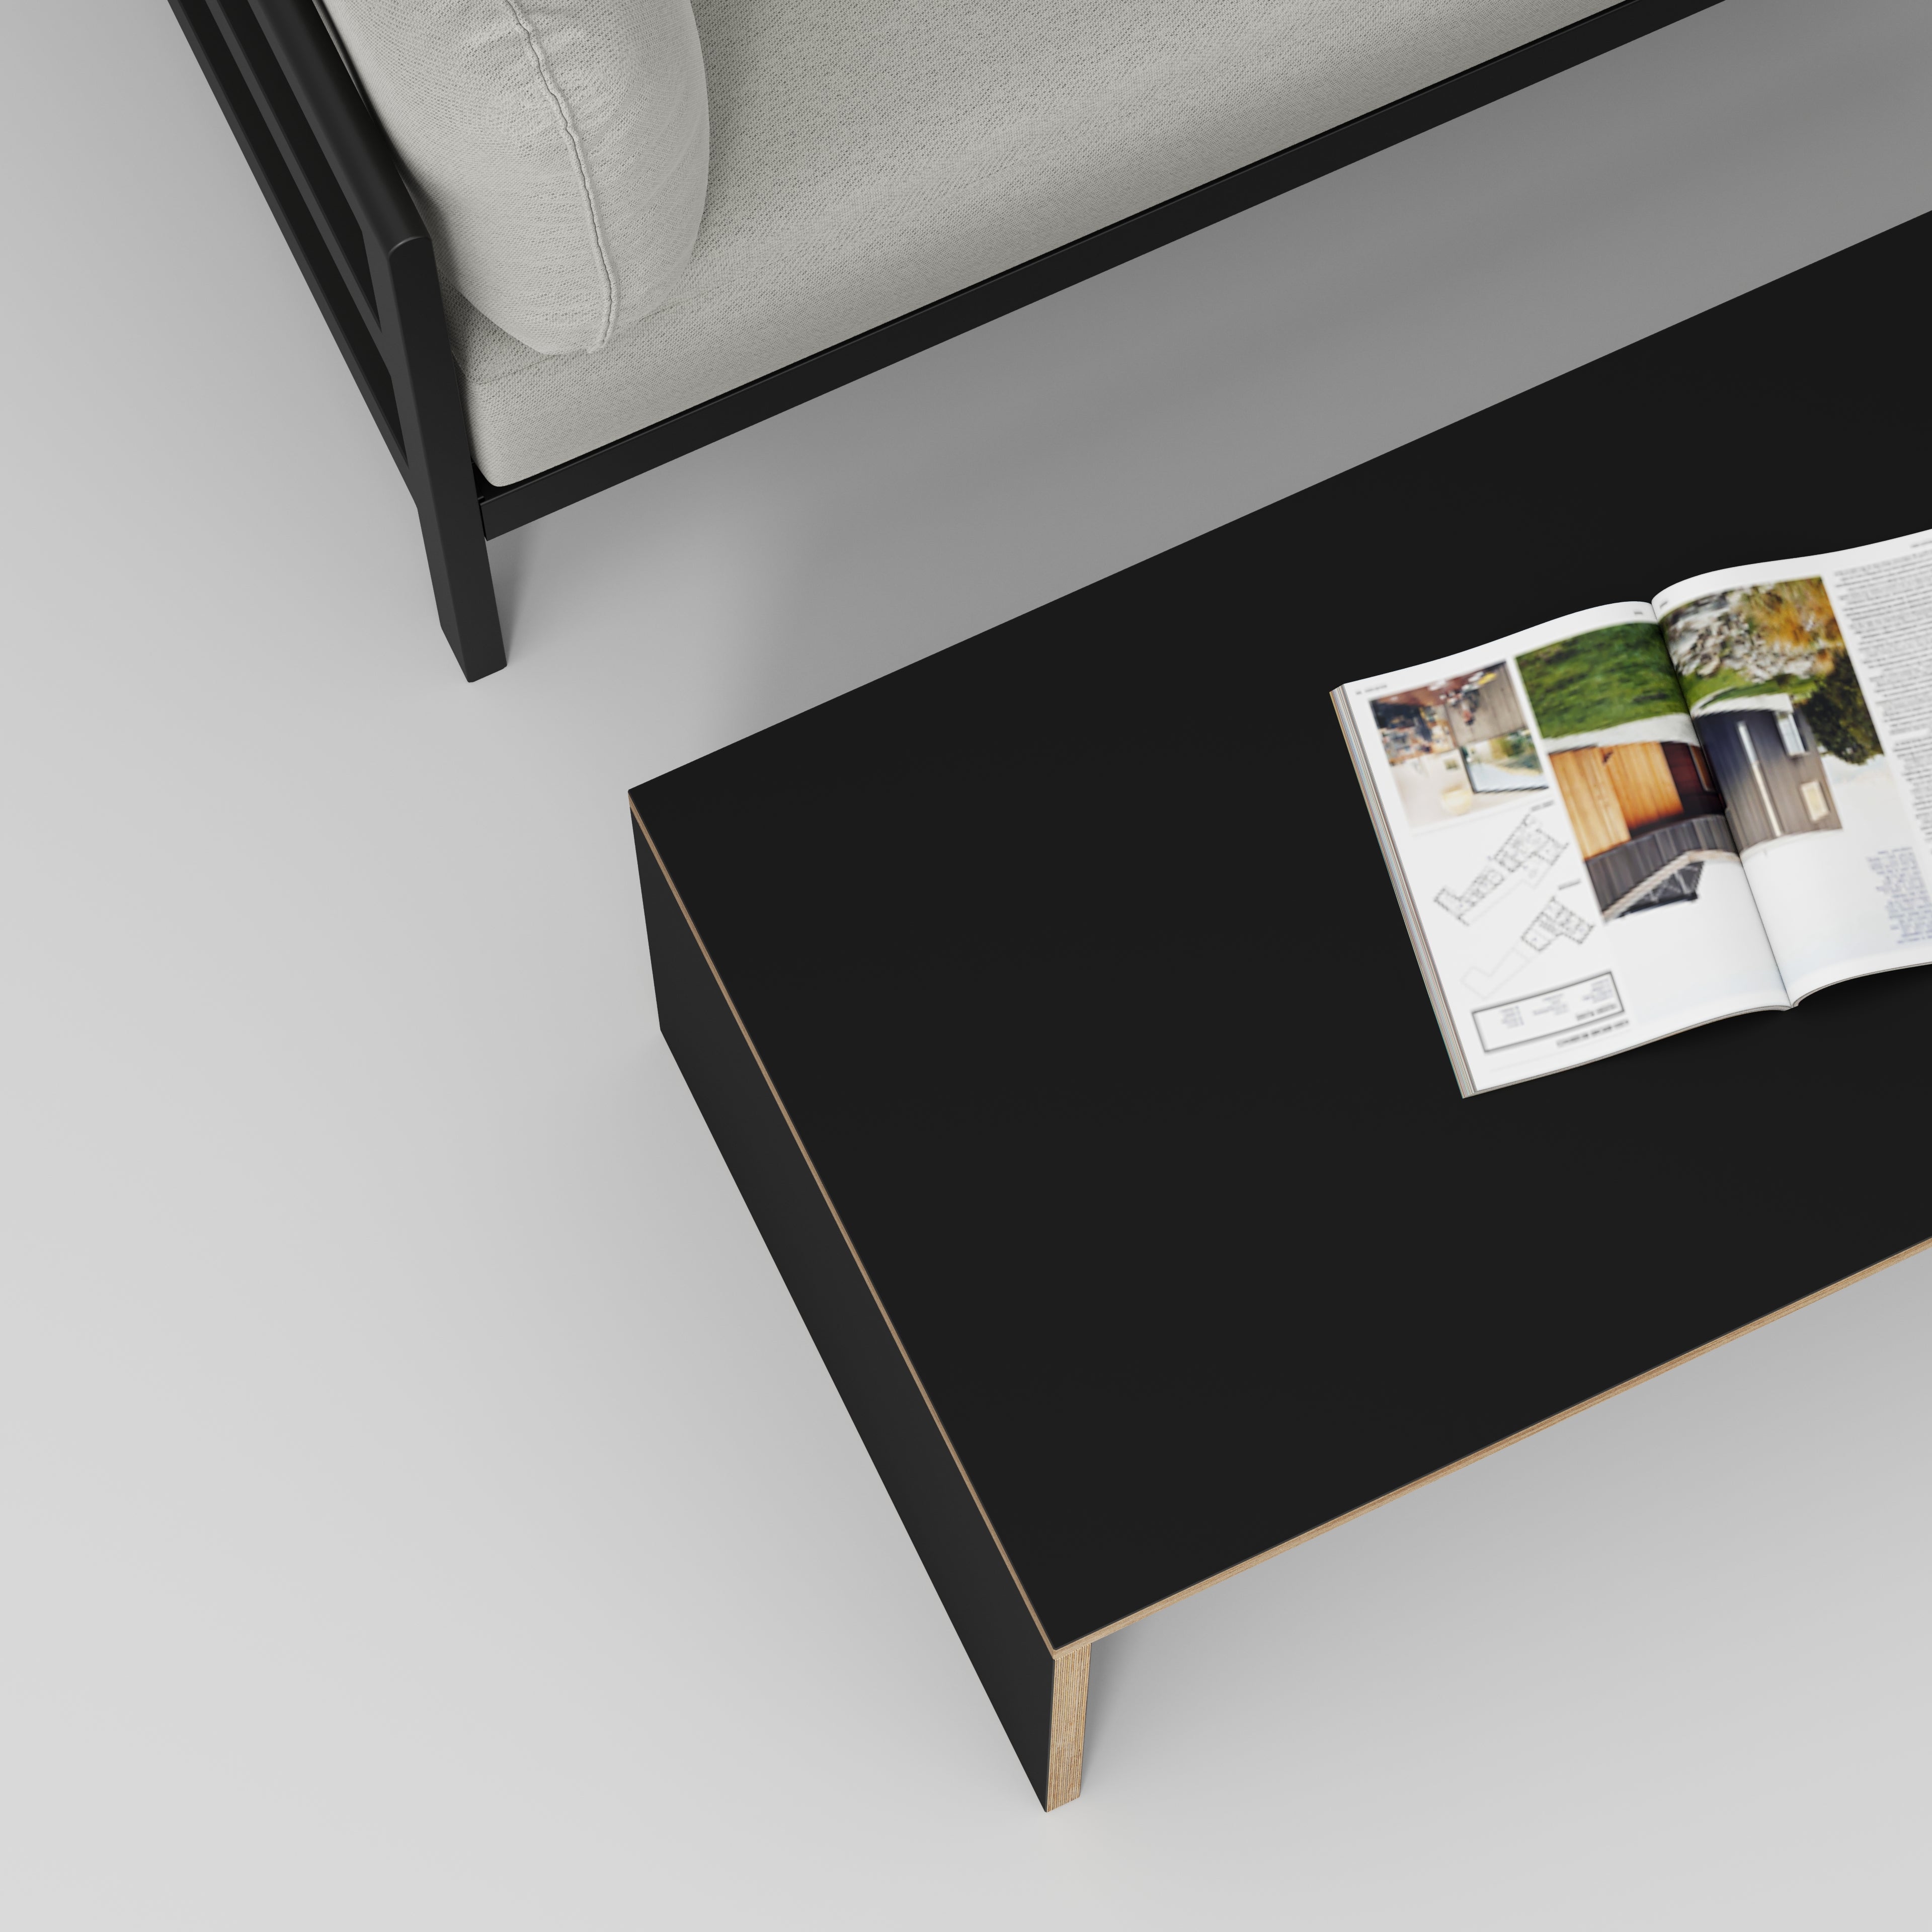 Coffee Table with Solid Sides - Formica Diamond Black - 1200(w) x 600(d) x 450(h)